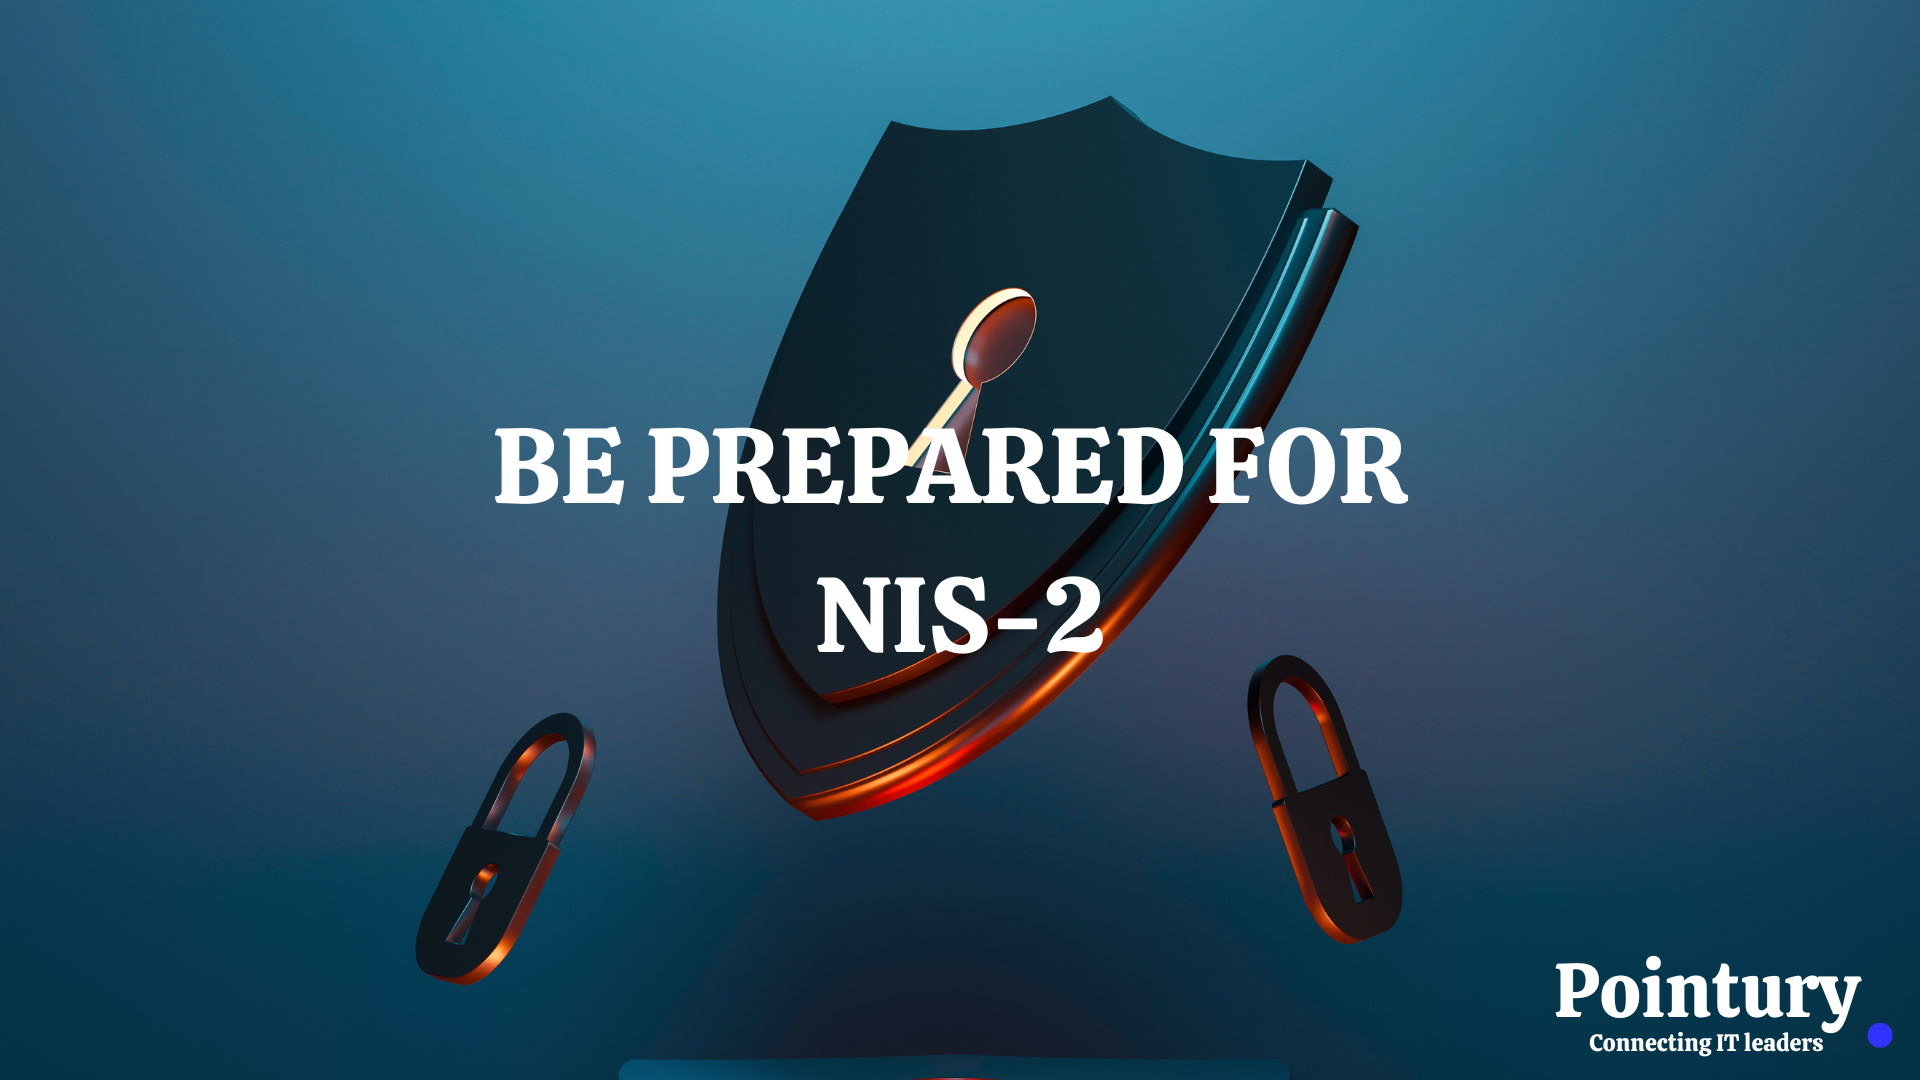 BE PREPARED FOR NIS-2